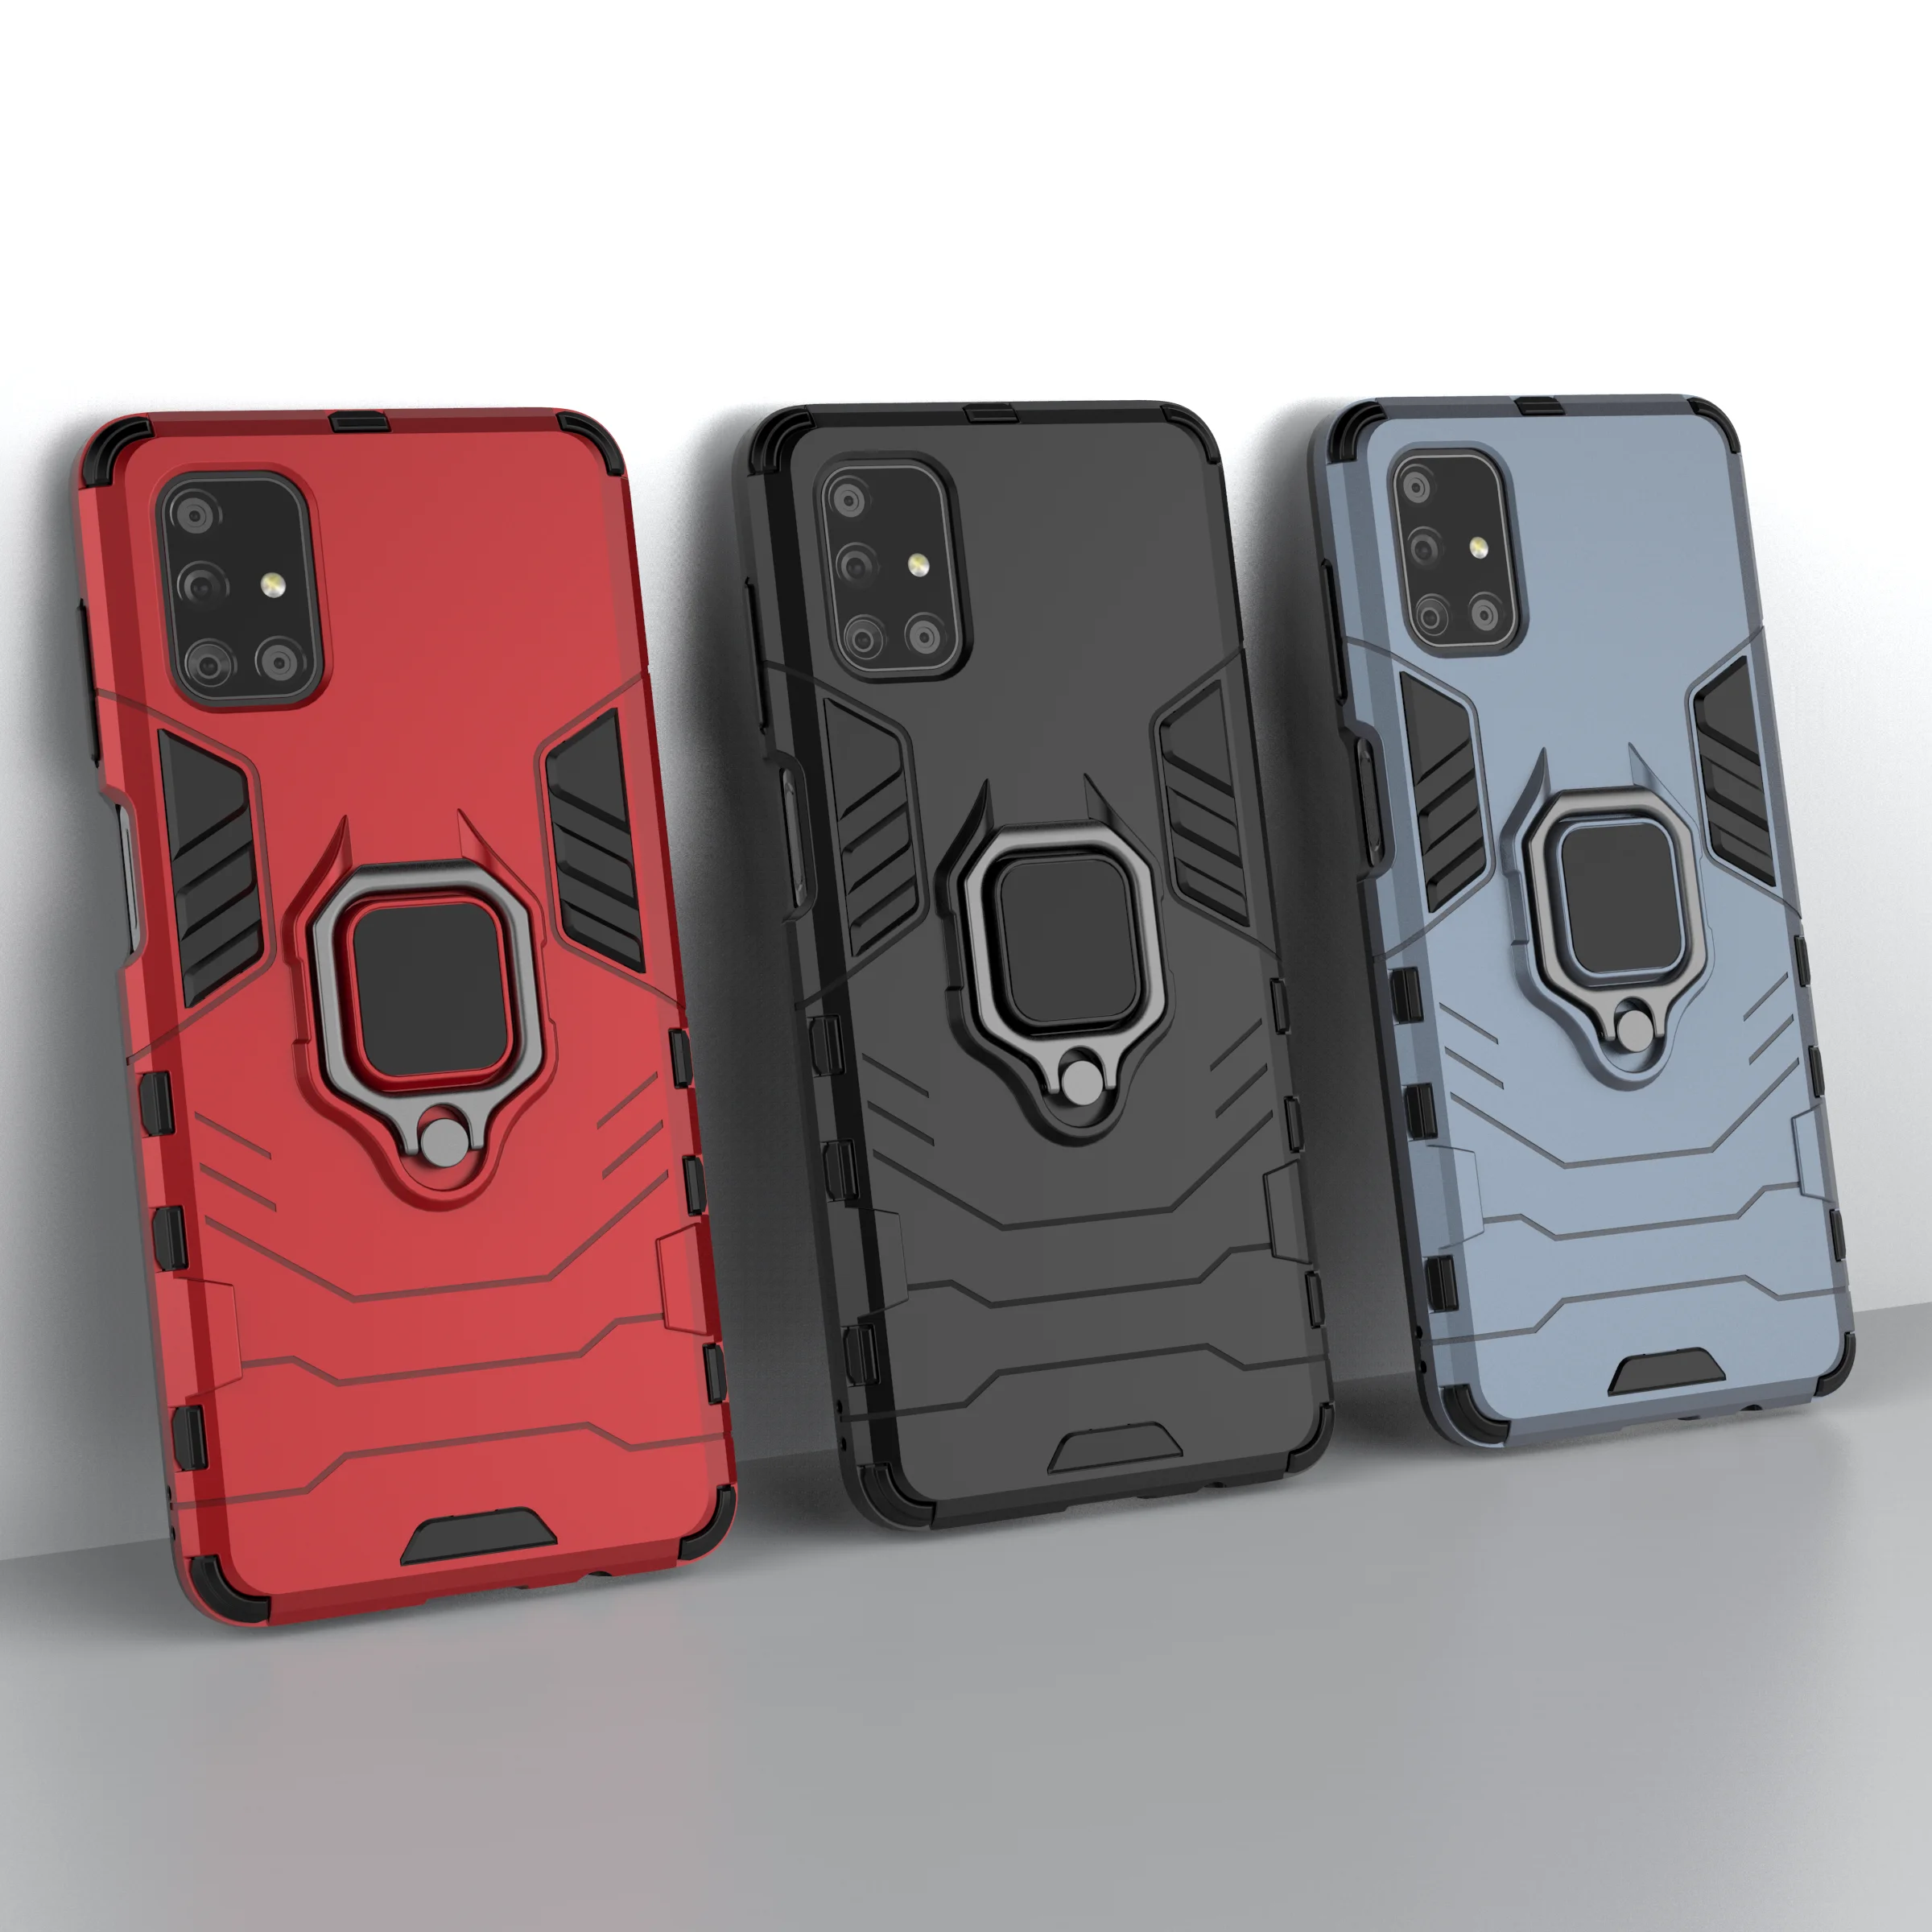 

Shockproof Rugged Armor Phone Case For Samsung Galaxy M51 M31 M11 M31S M01 M40S M30S M21 M40 M10 M30 M20 Metal Stand Back Cover